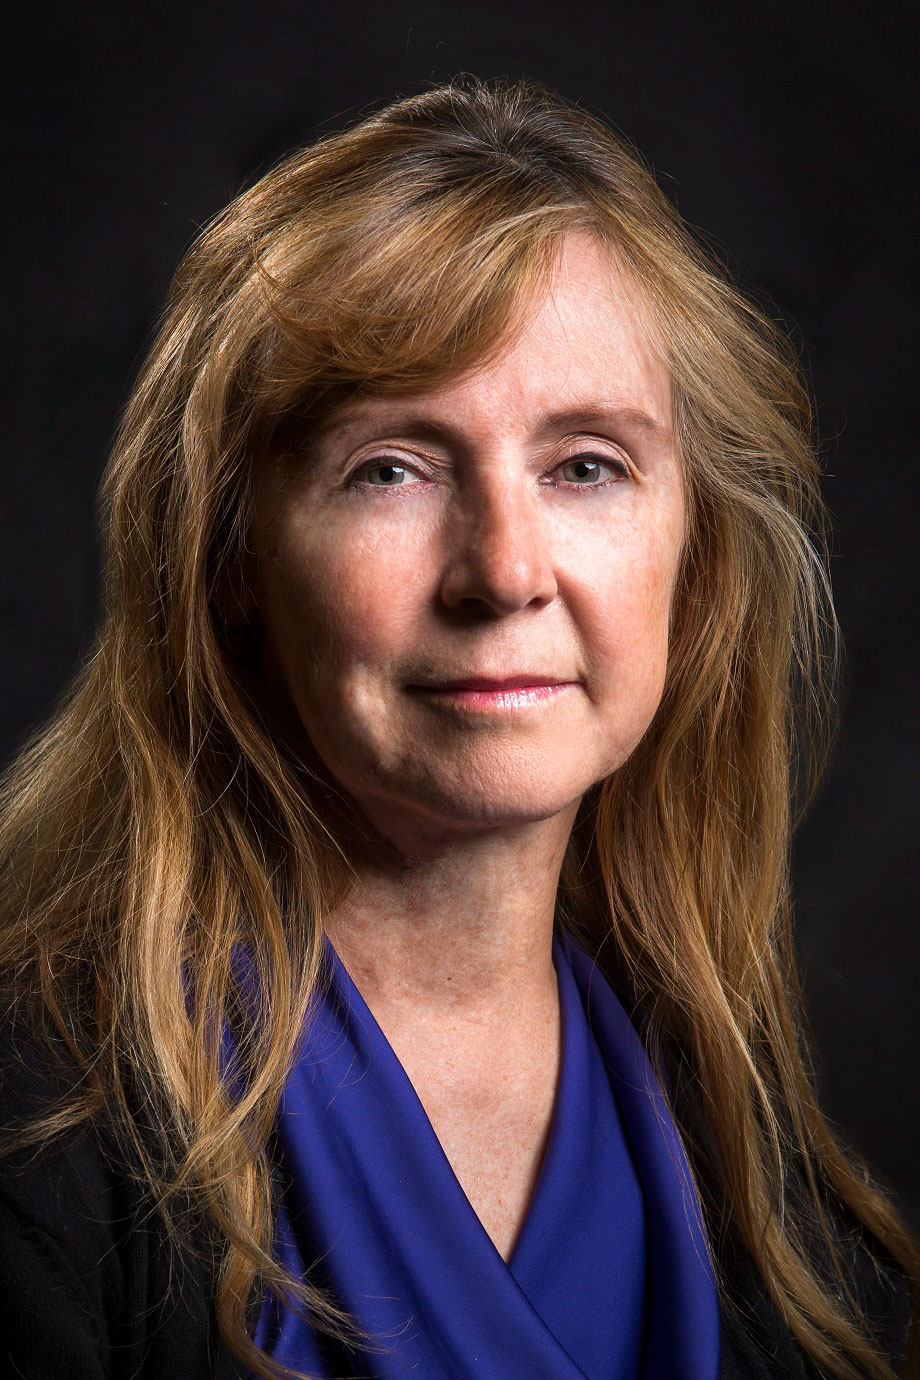 This is a picture of Jill Jasperson, a member of the faculty advisory board for Utah Valley University’s Center for the Study of Ethics.